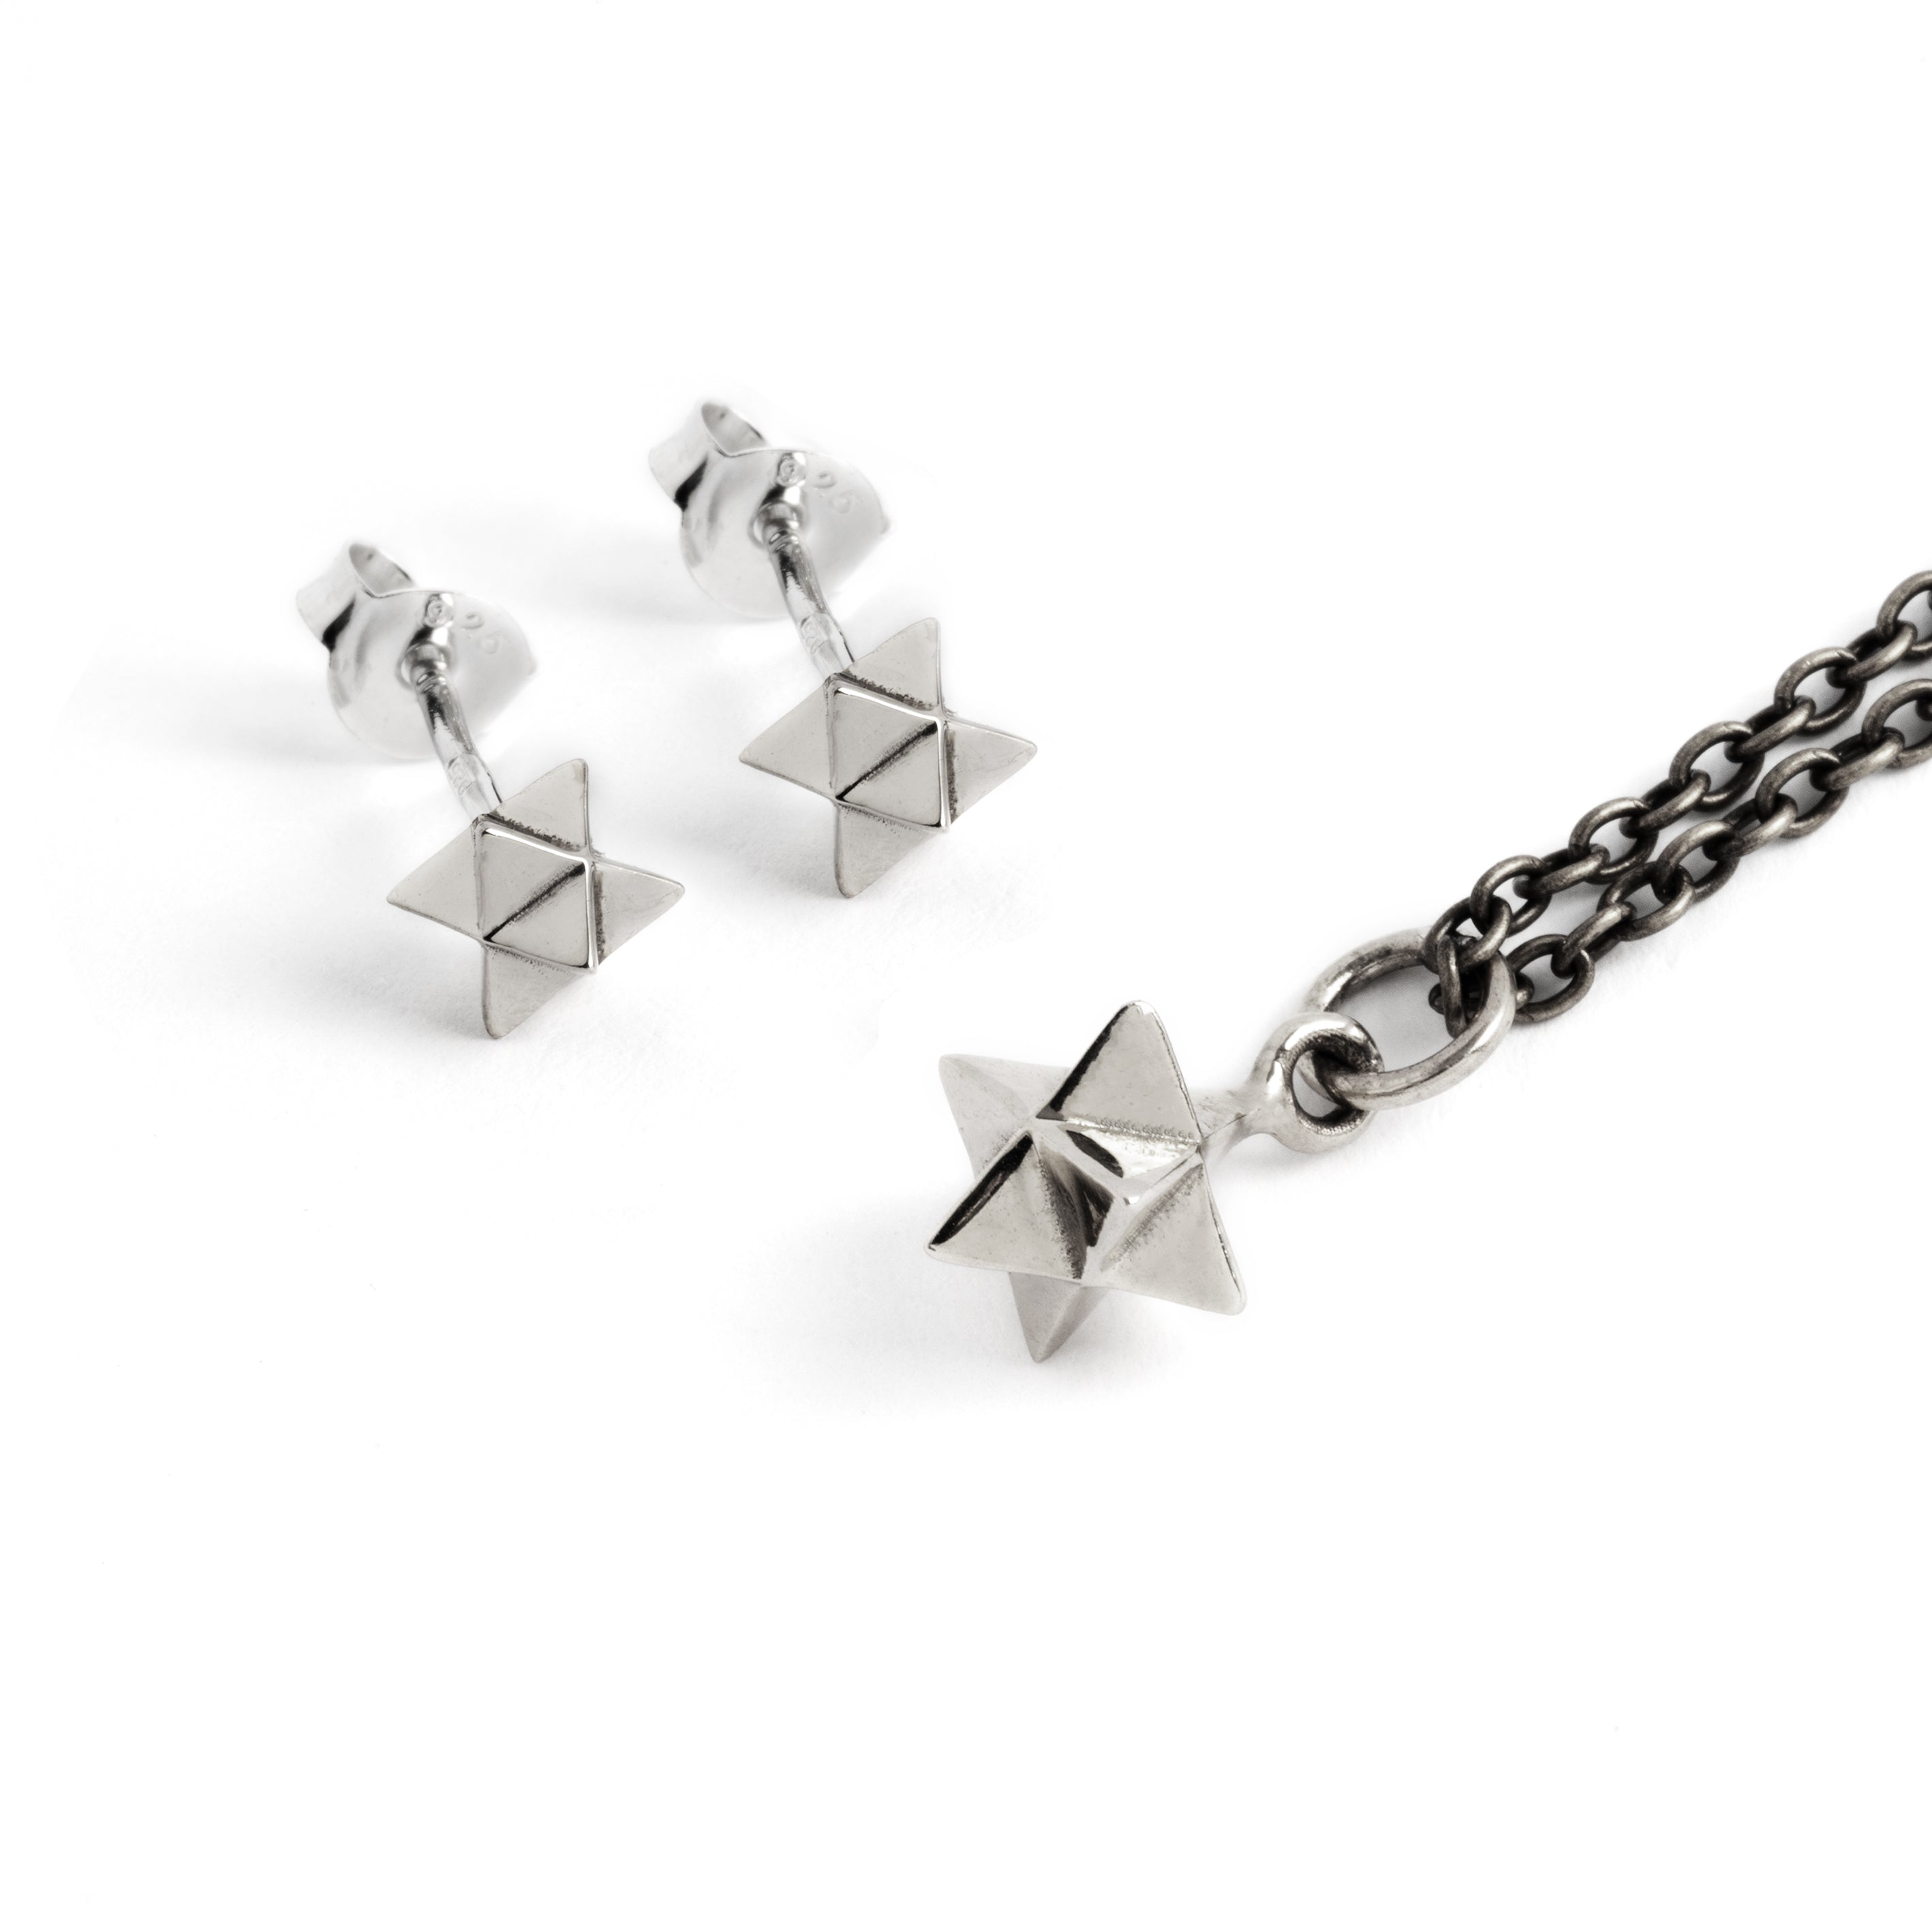 Silver Merkaba Ear Studs and a matching Merkaba charm necklace